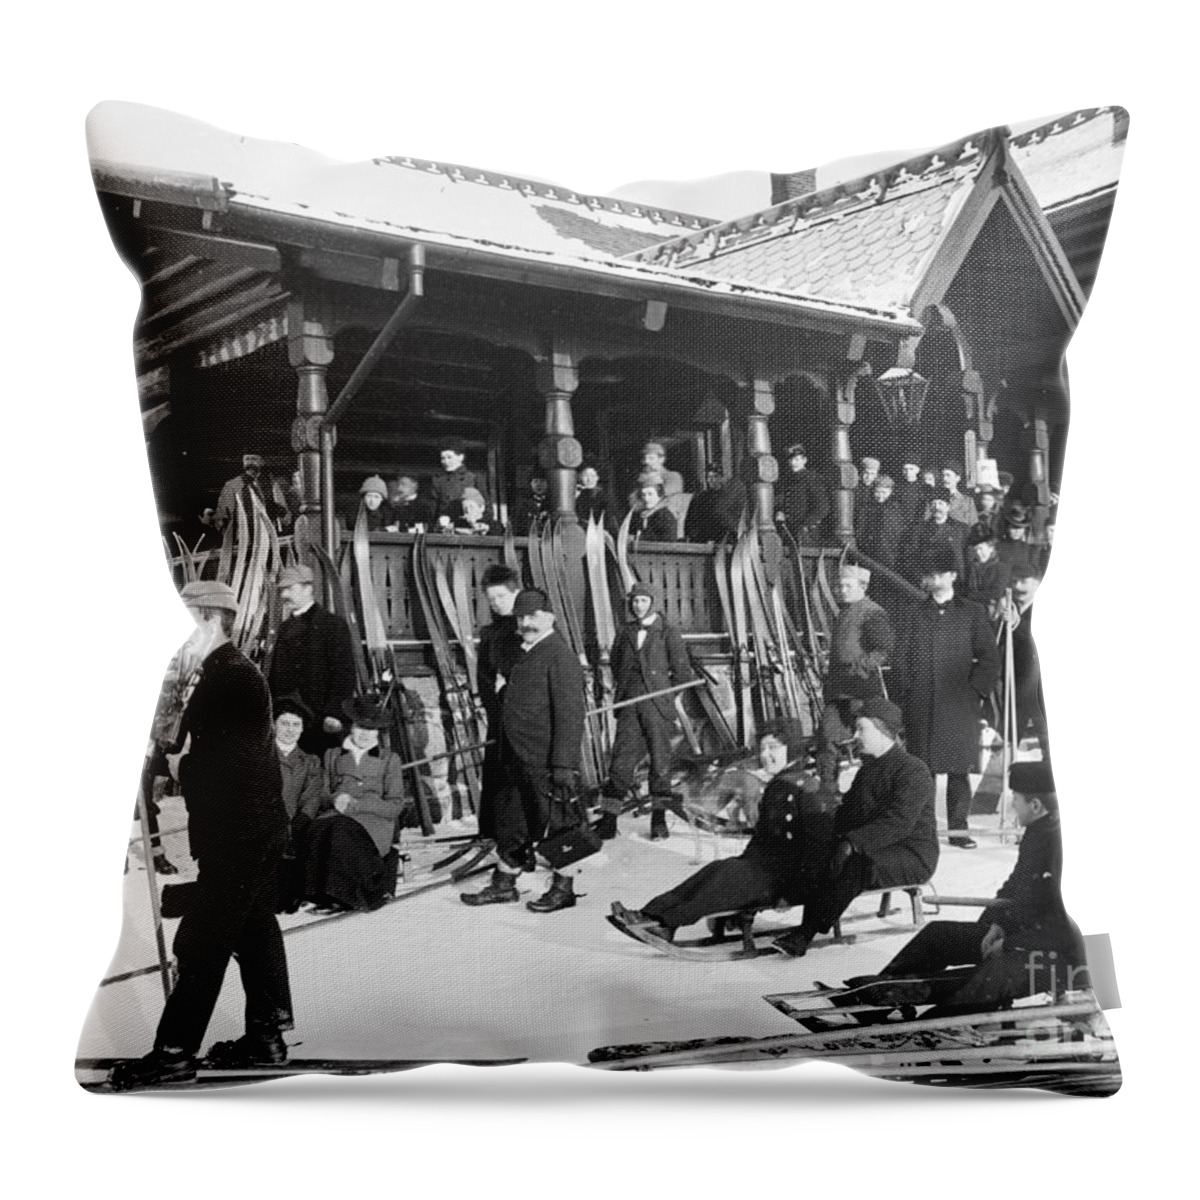 Exterior Throw Pillow featuring the photograph Frognerseteren by O Vaering